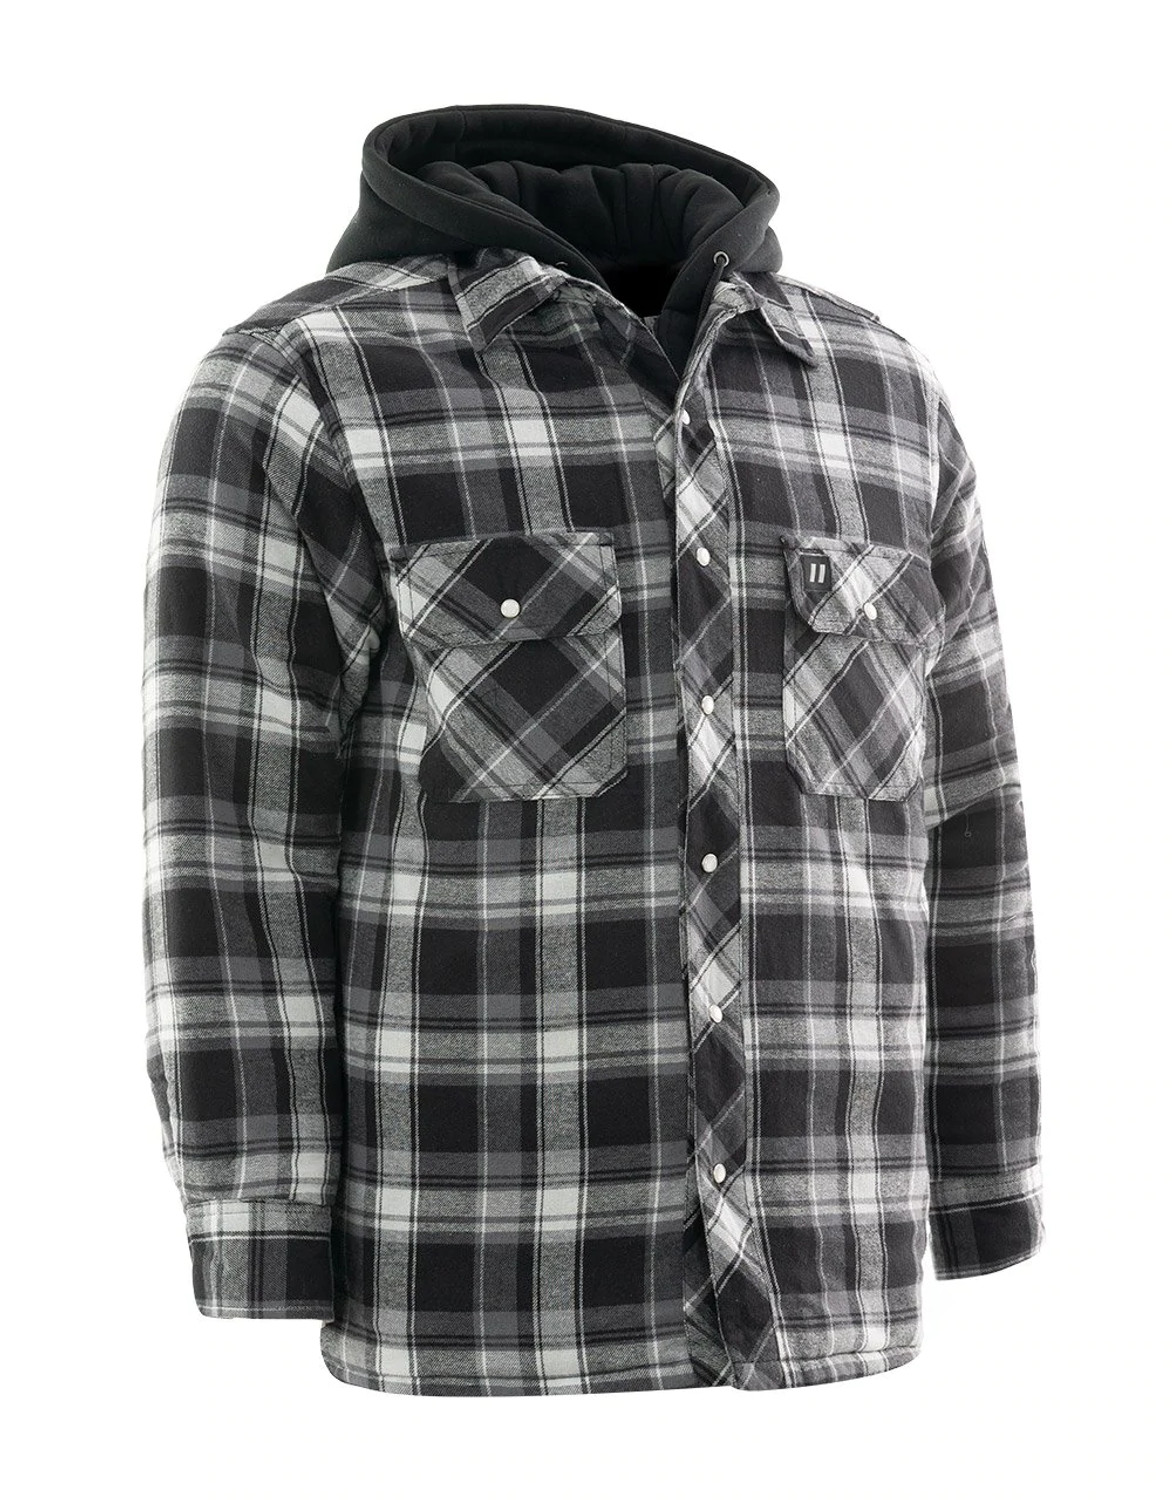 Forcefield Grey Plaid Hooded Quilted Flannel Shirt Jacket - XL